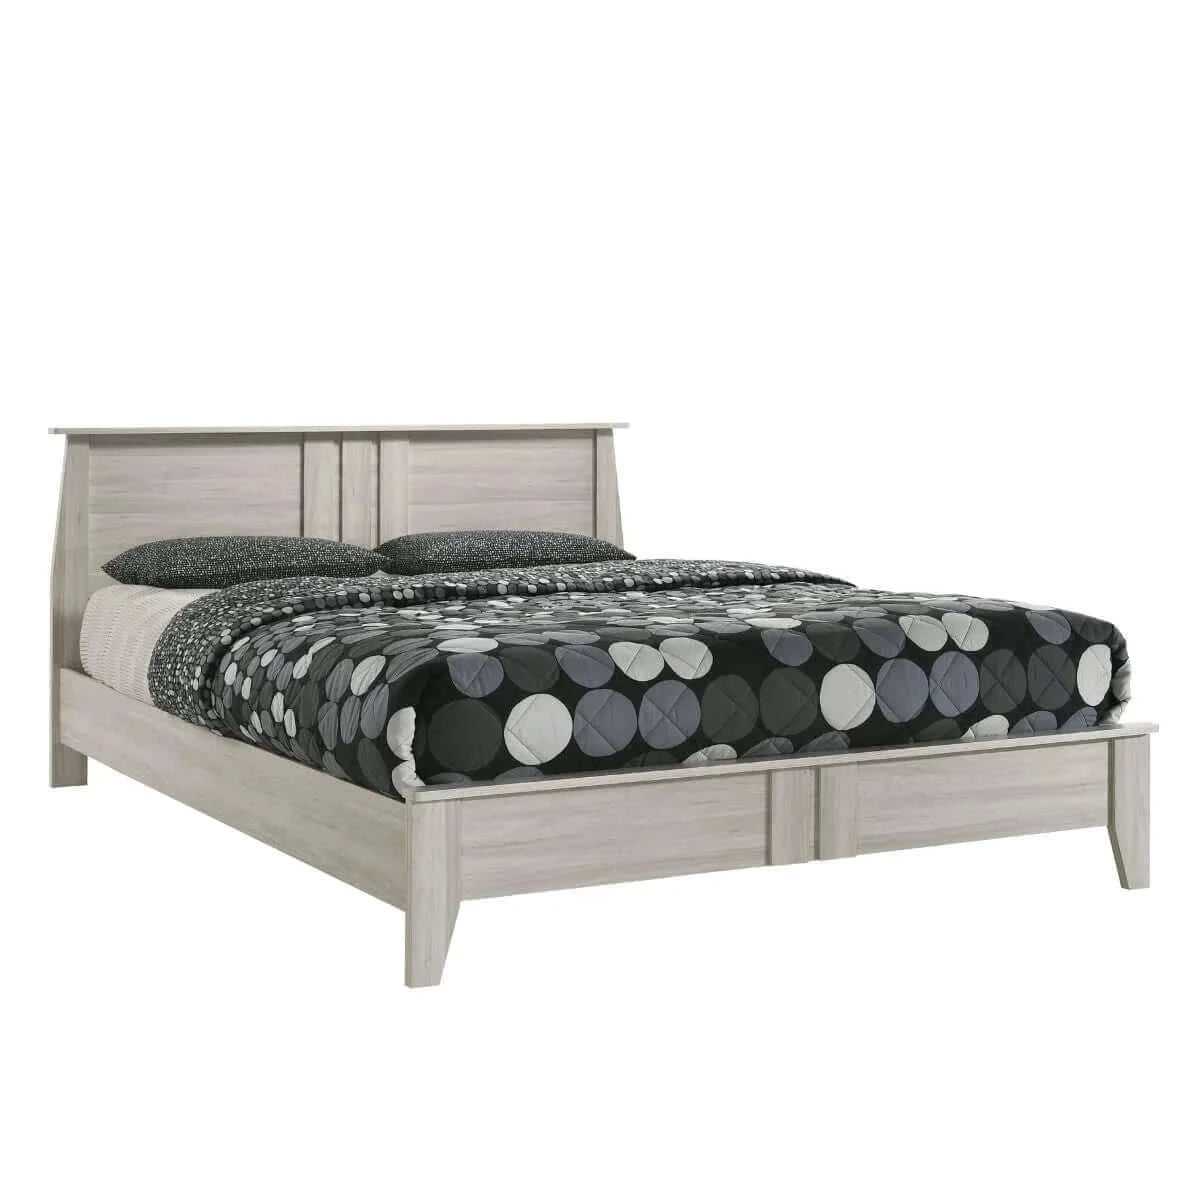 Buy double wooden bed frame base - upinteriors-Upinteriors